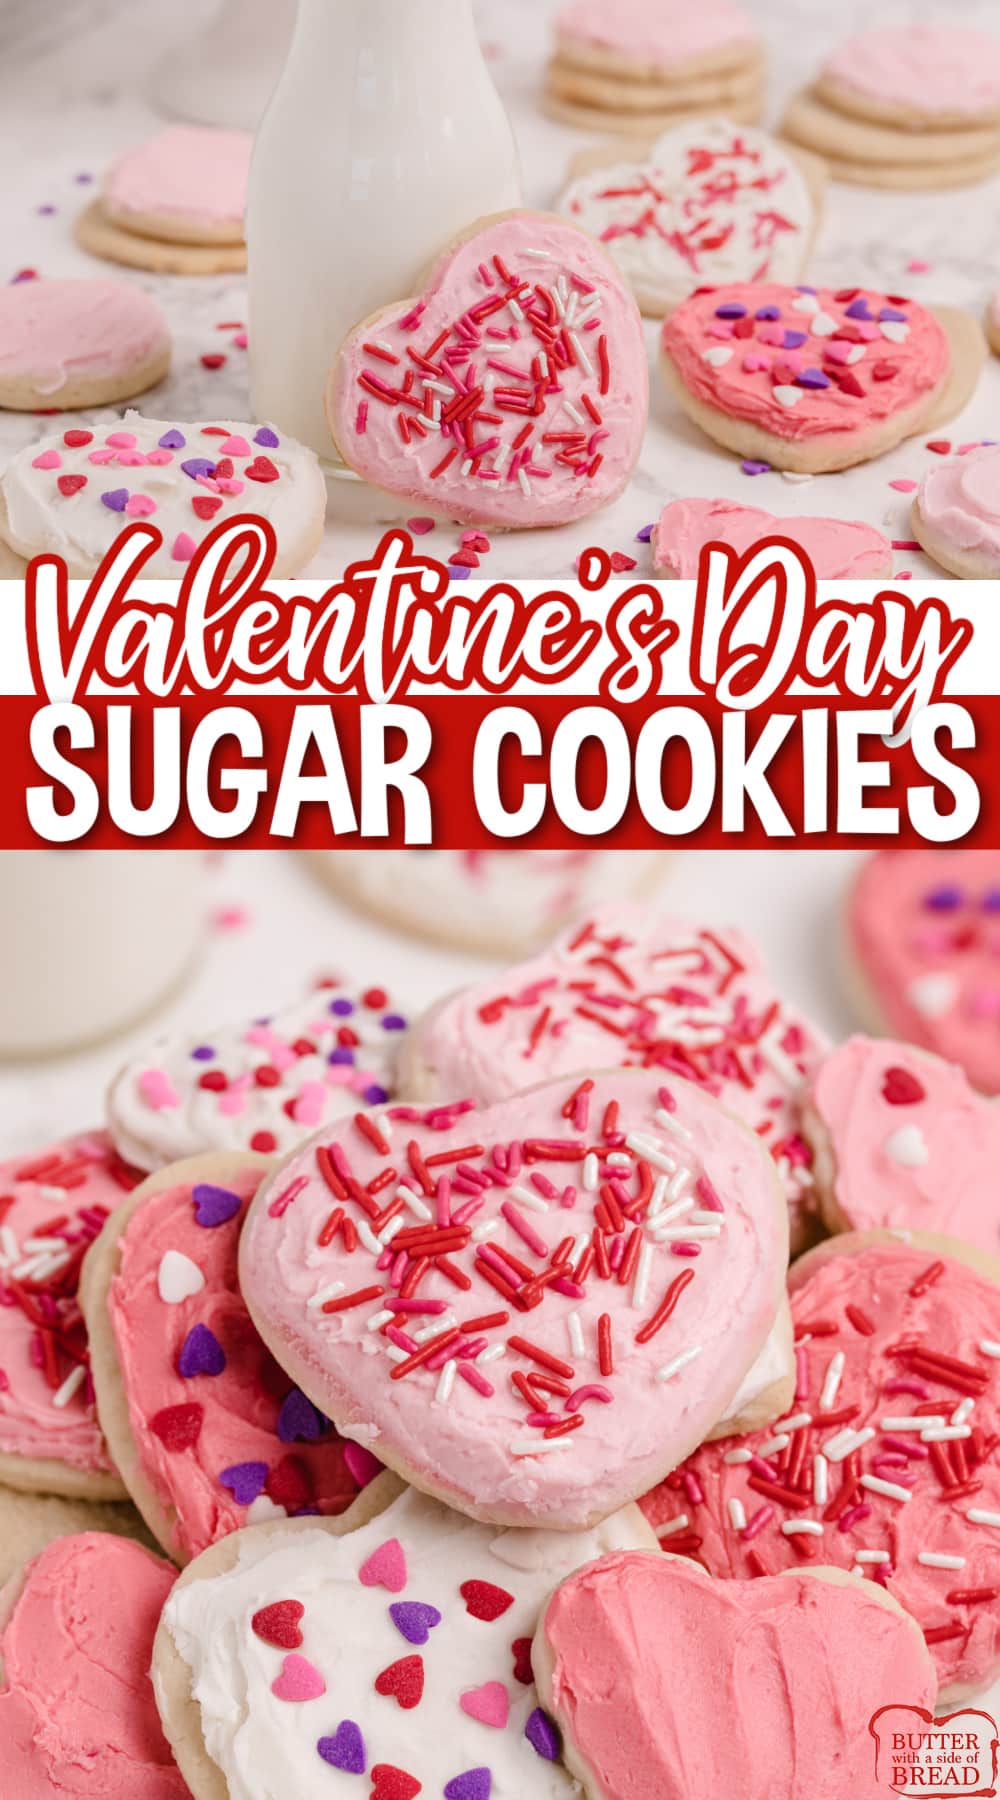 Valentine's Sugar Cookies are soft, thick, and easily the best sugar cookie recipe I’ve ever tried. These sugar cookies hold their shape when baked and they are moist and perfectly sweet too!